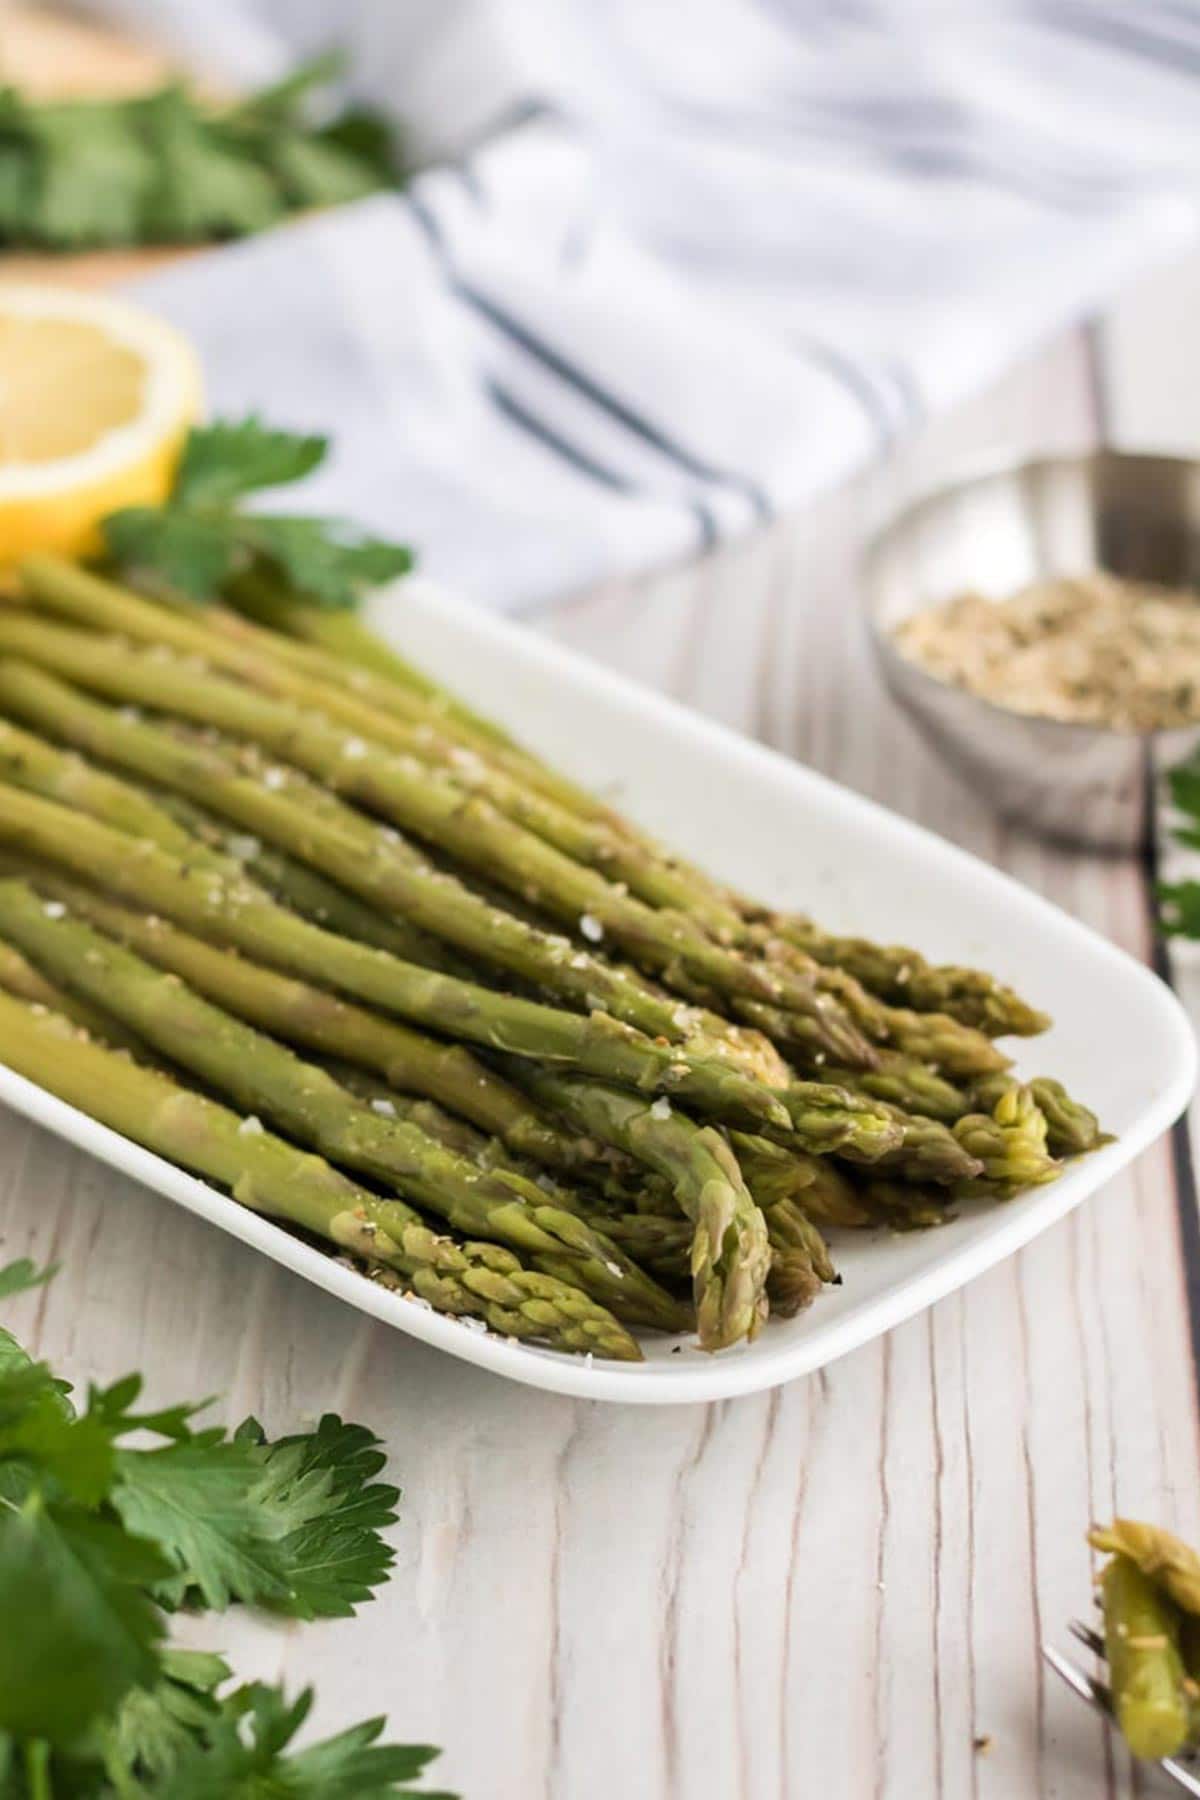 Asparagus cooked in the instant pot is served on a white plate.